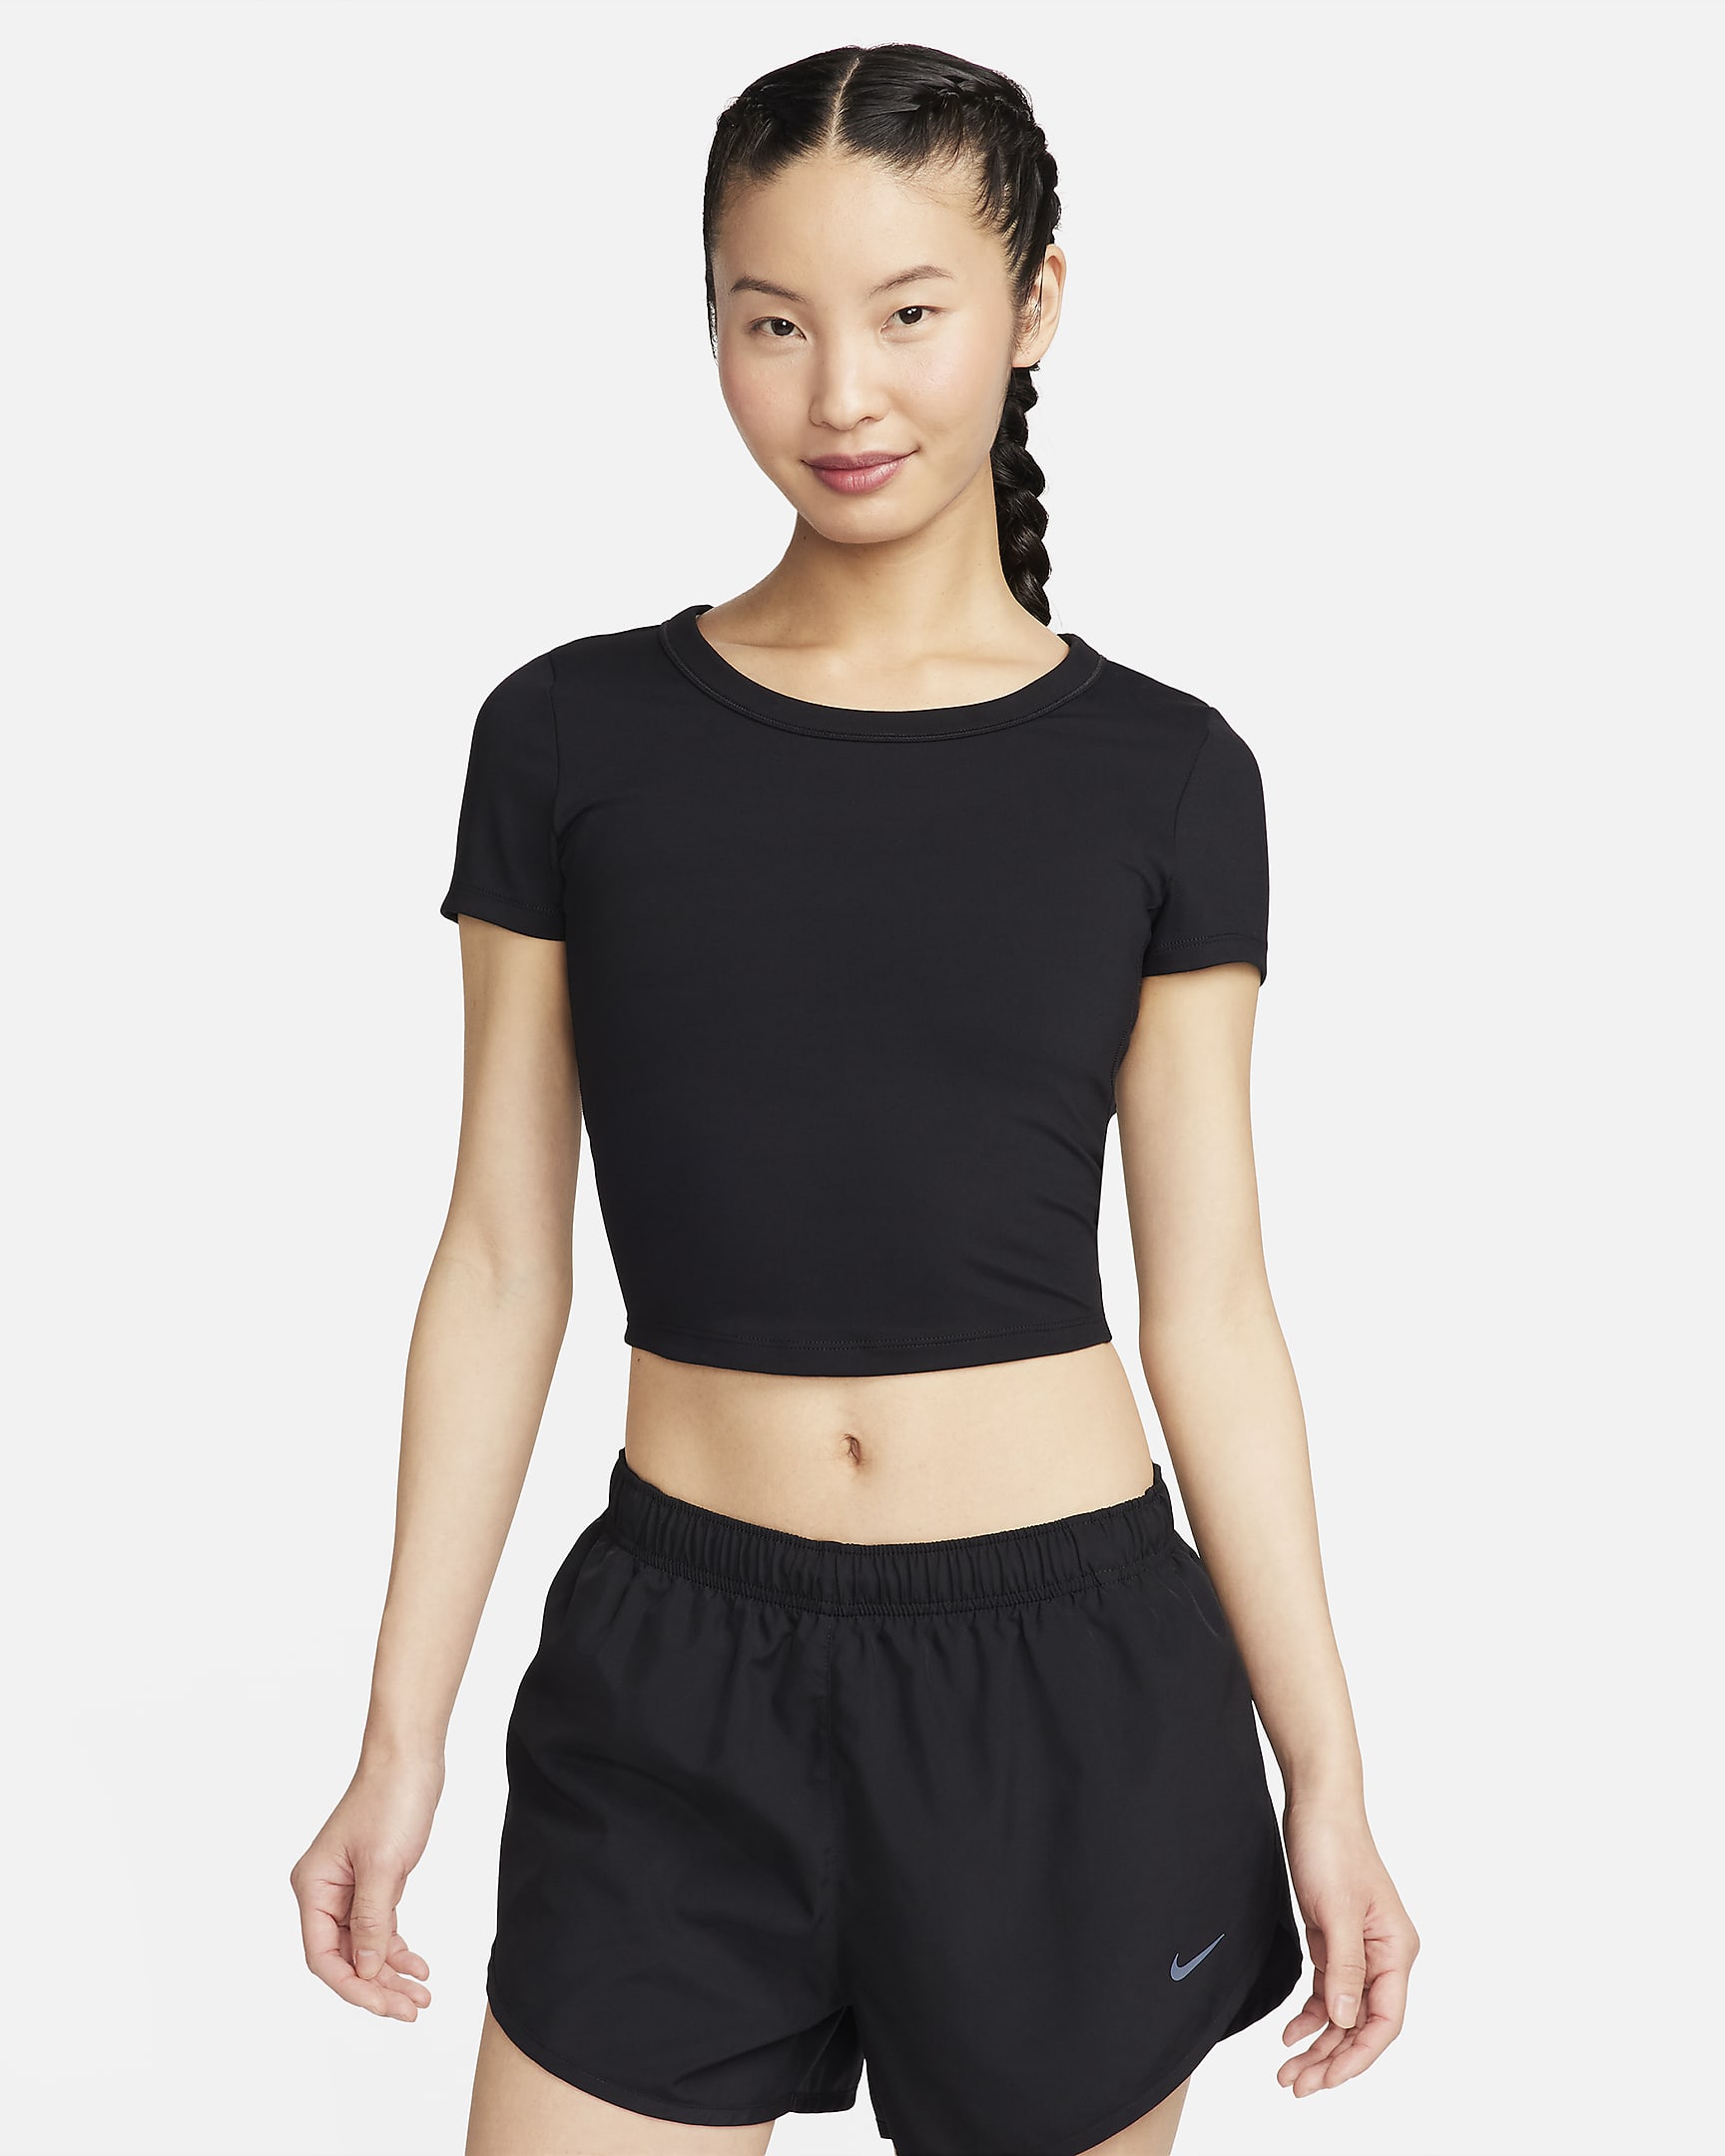 Nike One Fitted Women's Dri-FIT Short-Sleeve Cropped Top. Nike SG